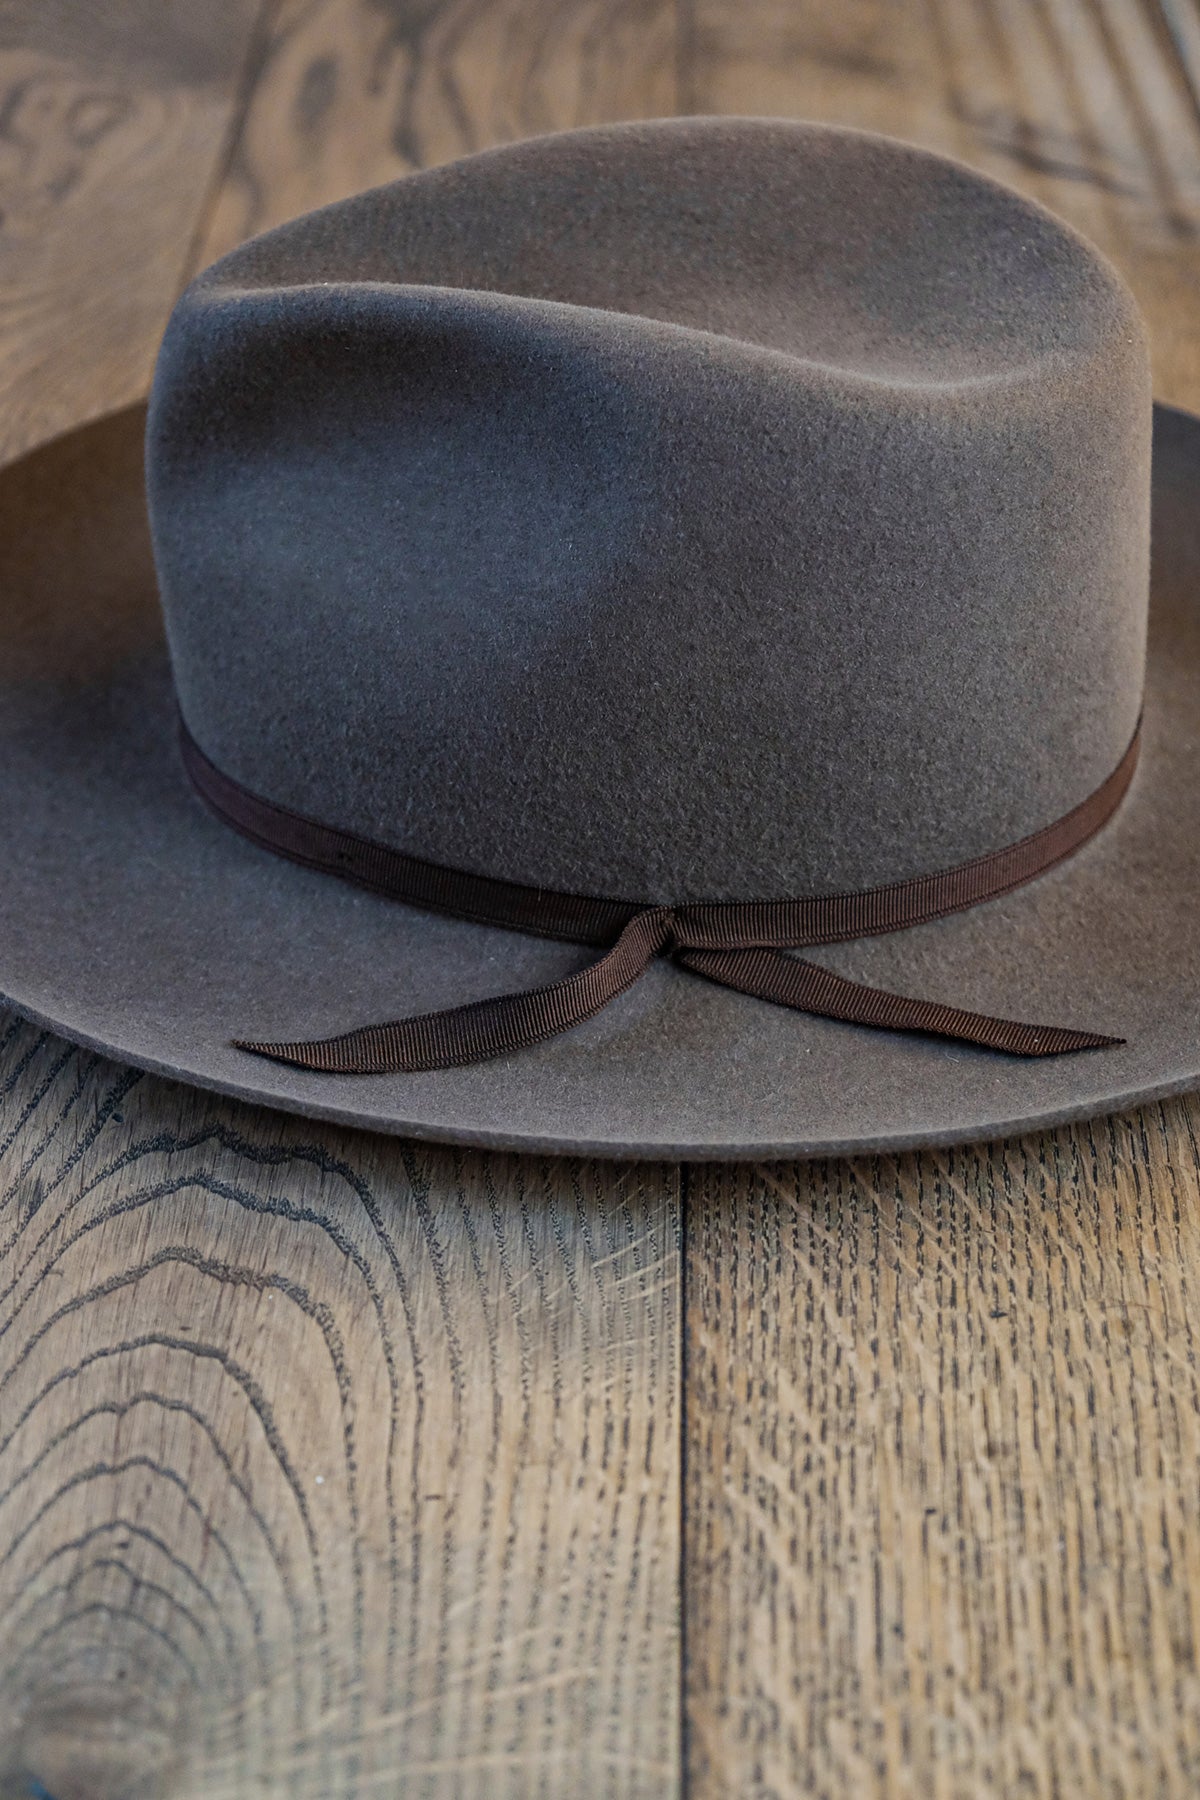 The Rugged Society - 50's Style Worker Western Hat - Handmade to order - Pre-orders only